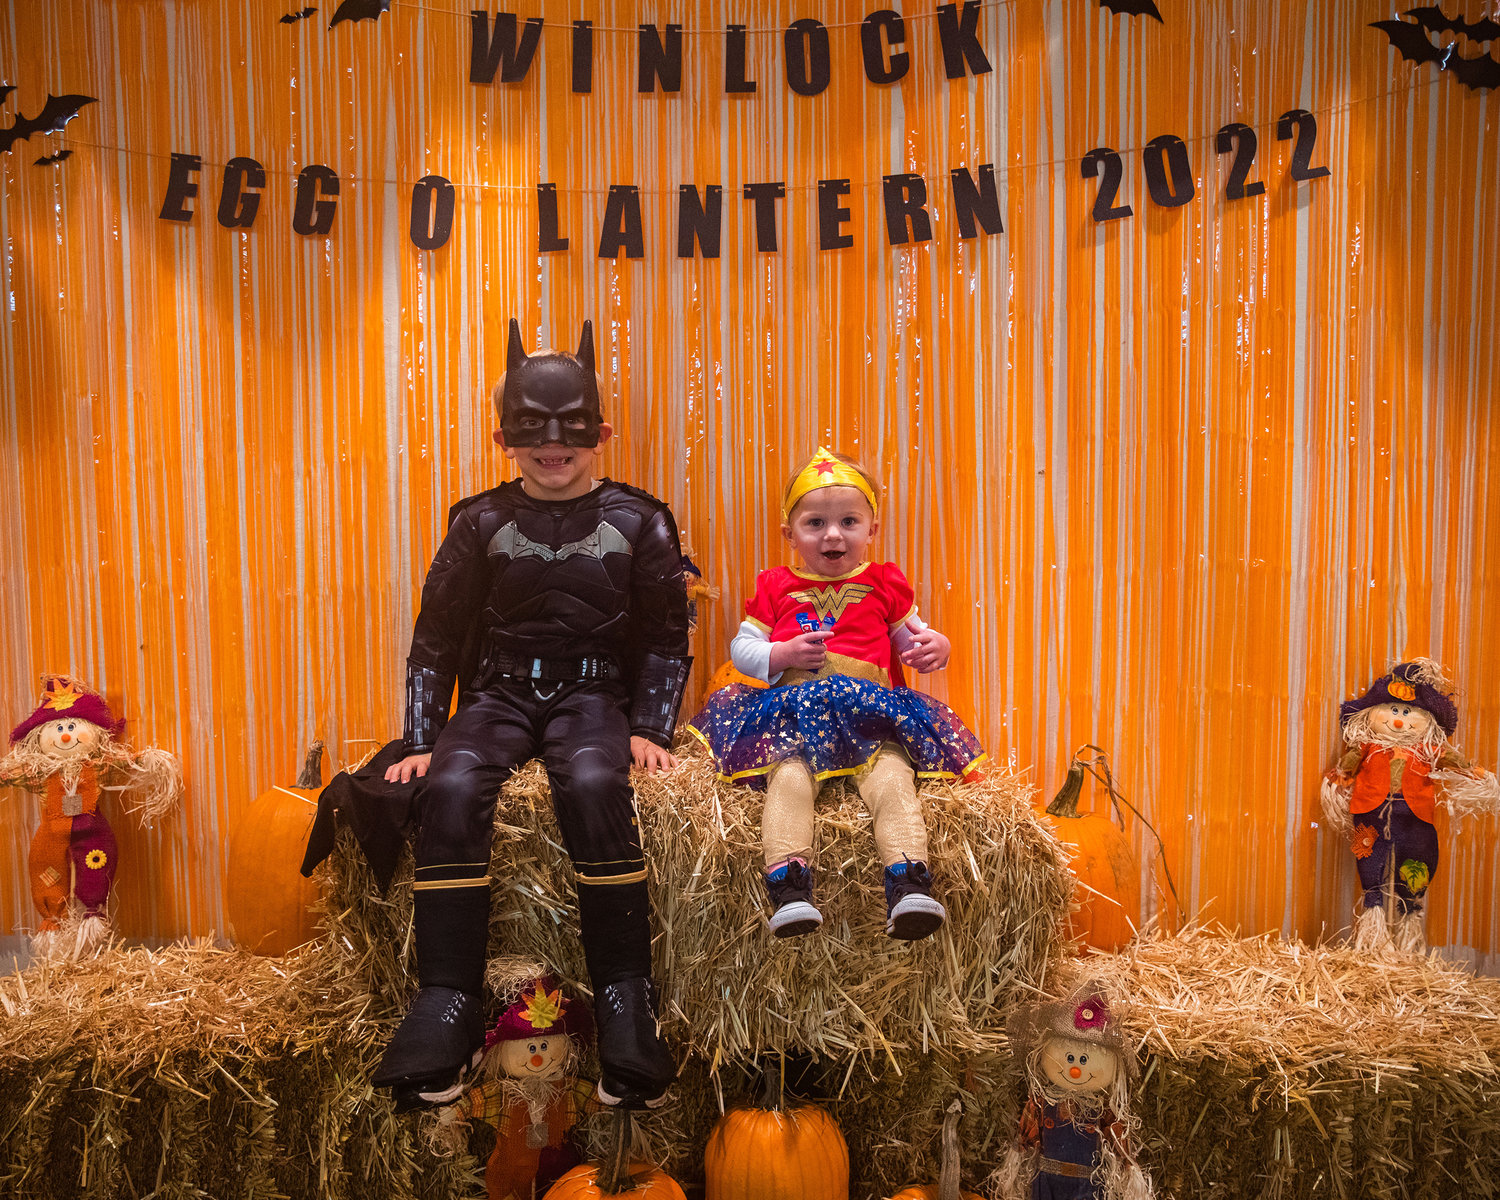 Rowdy, left, and Logan Prosser, right, smile for a photo inside the Winlock Community Building during Egg-O-Lantern festivities on Halloween.